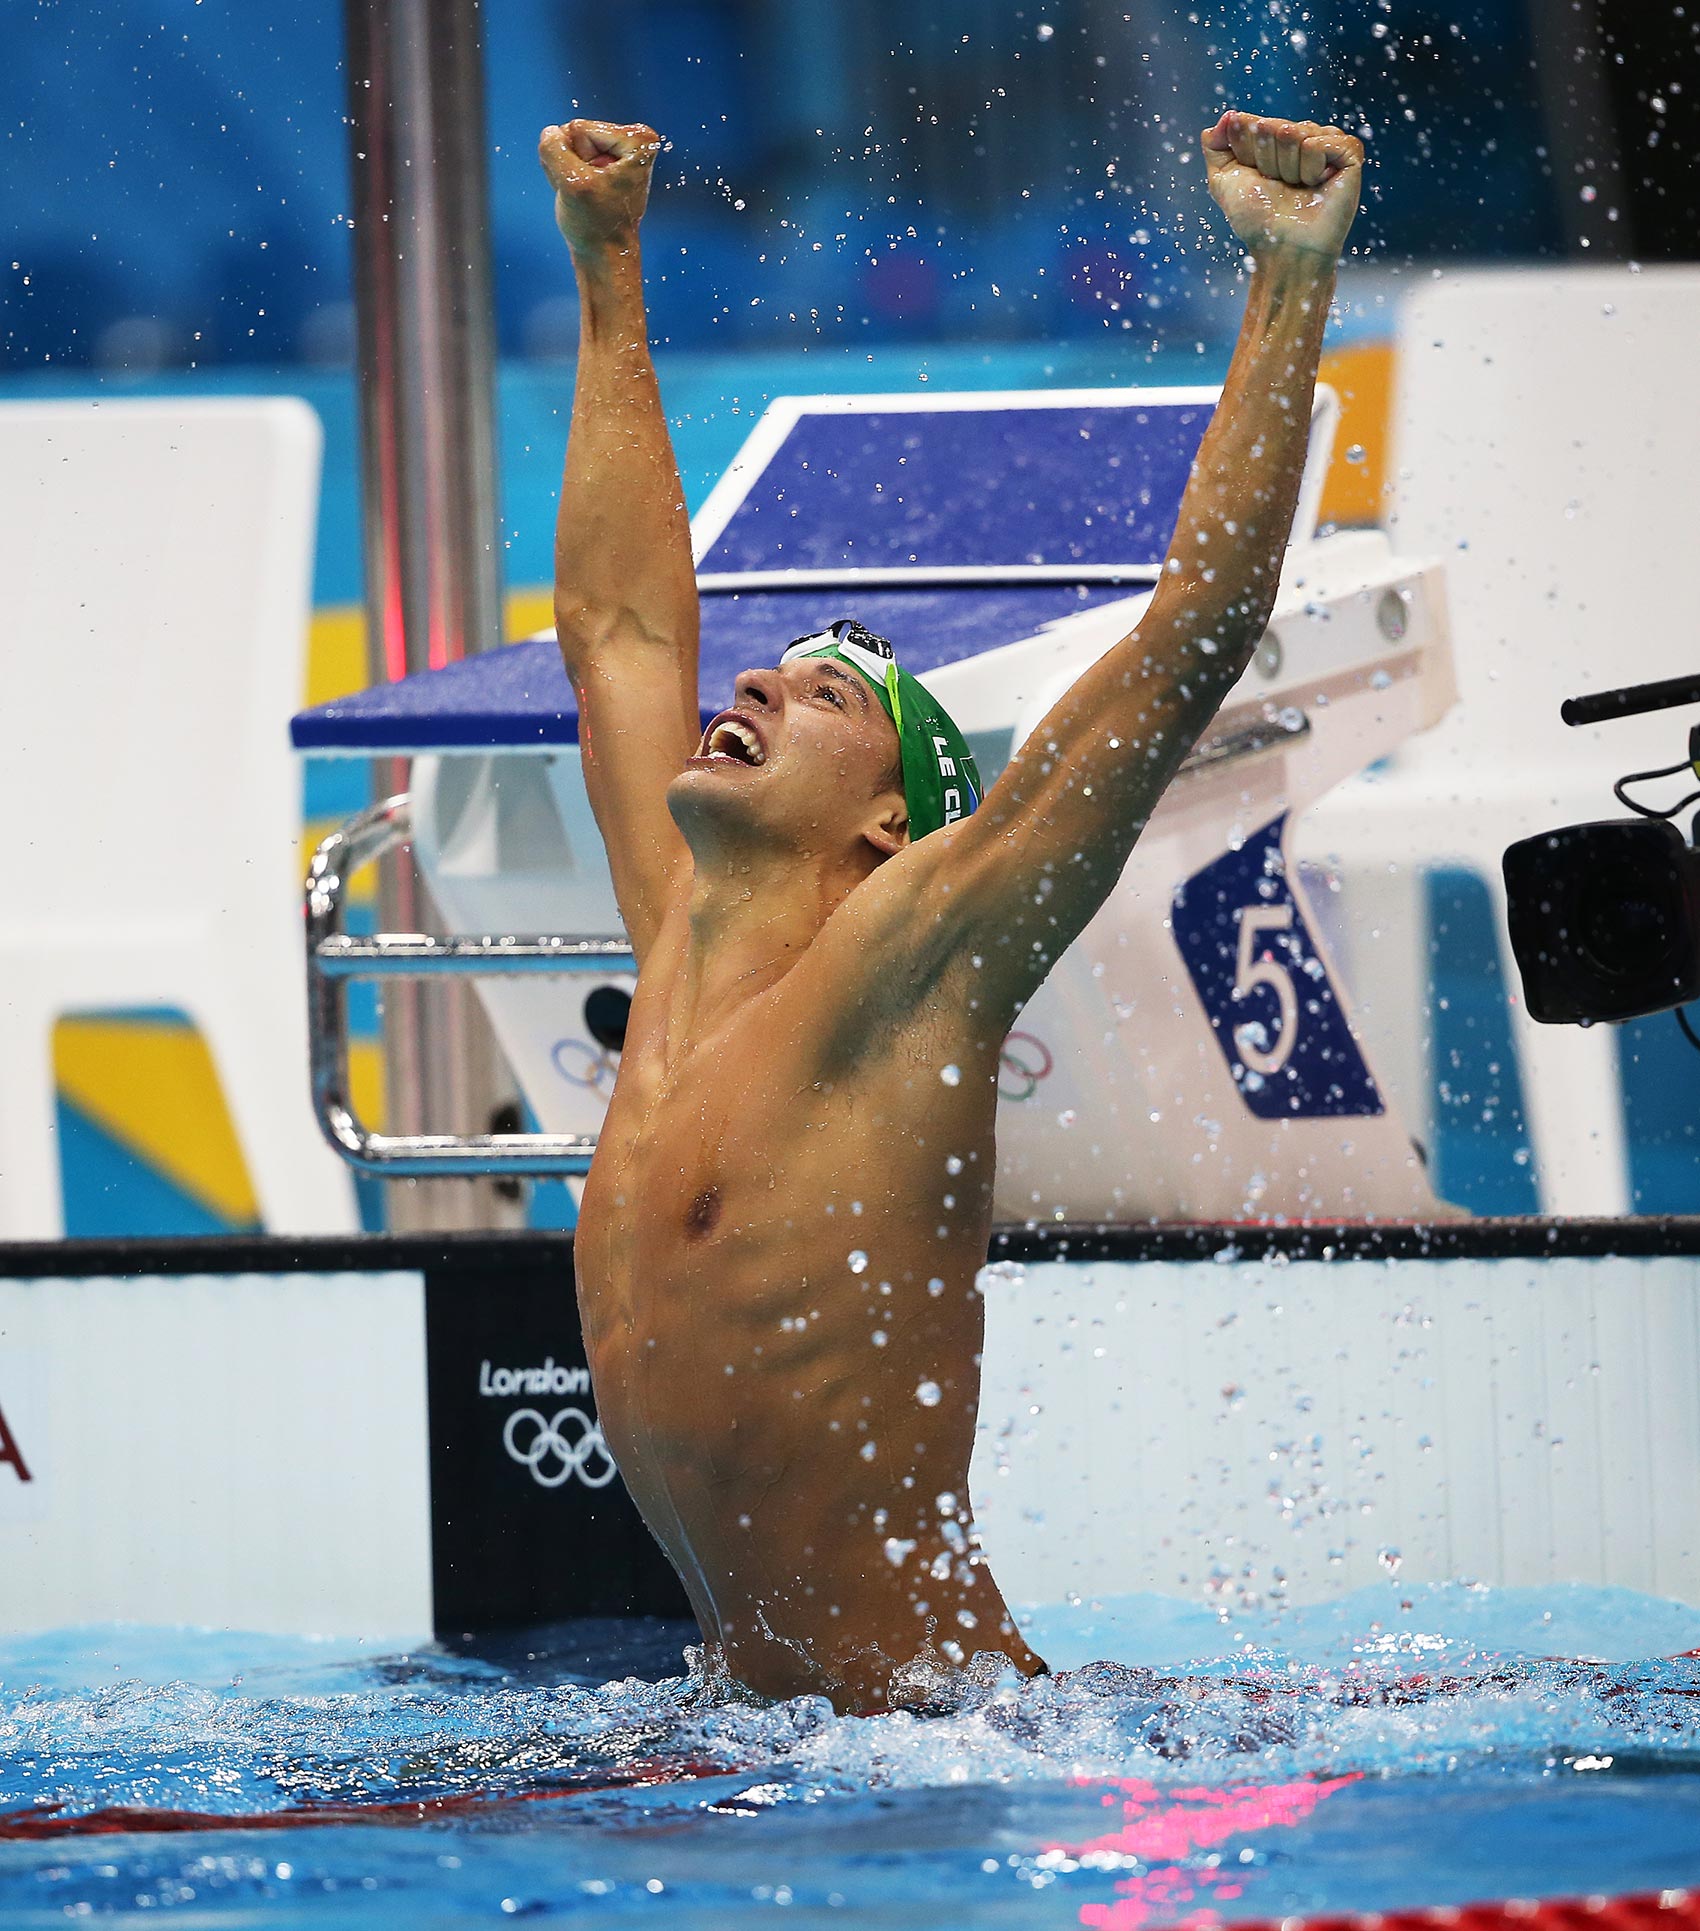   London Olympics 2012 - Swimming Day 4 - Chad le Clos of South Africa celebrates winning the Gold Medal in the Men